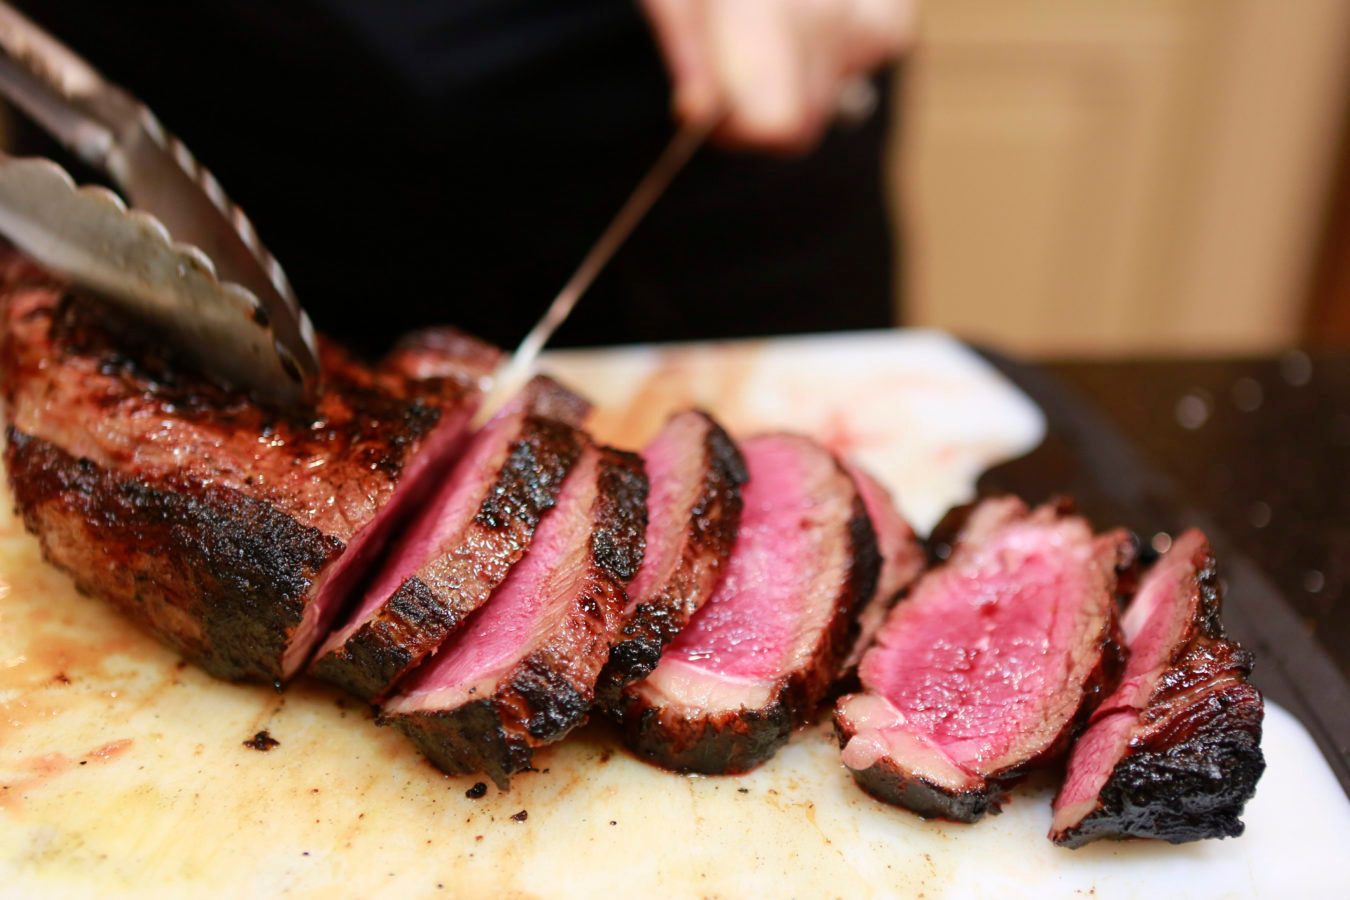 How to cook beef this Valentine’s Day, according to top chefs